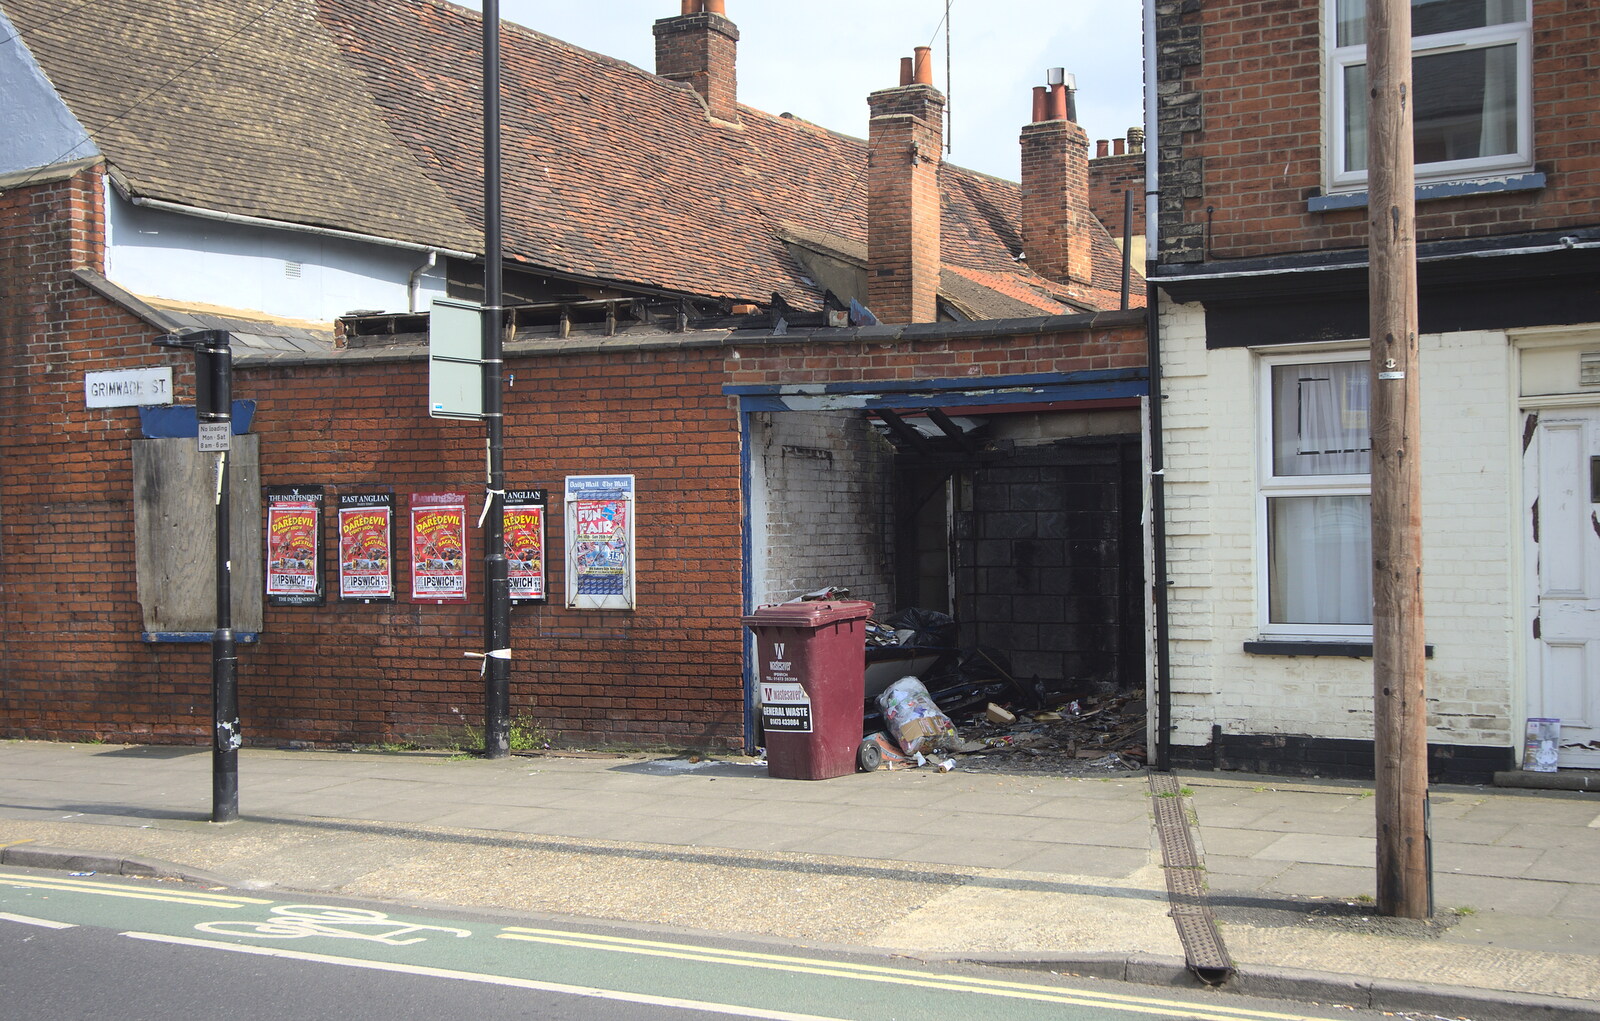 A burned-out garage on Grimwade Street from The Dereliction of Suffolk County Council, Ipswich, Suffolk - 3rd April 2012